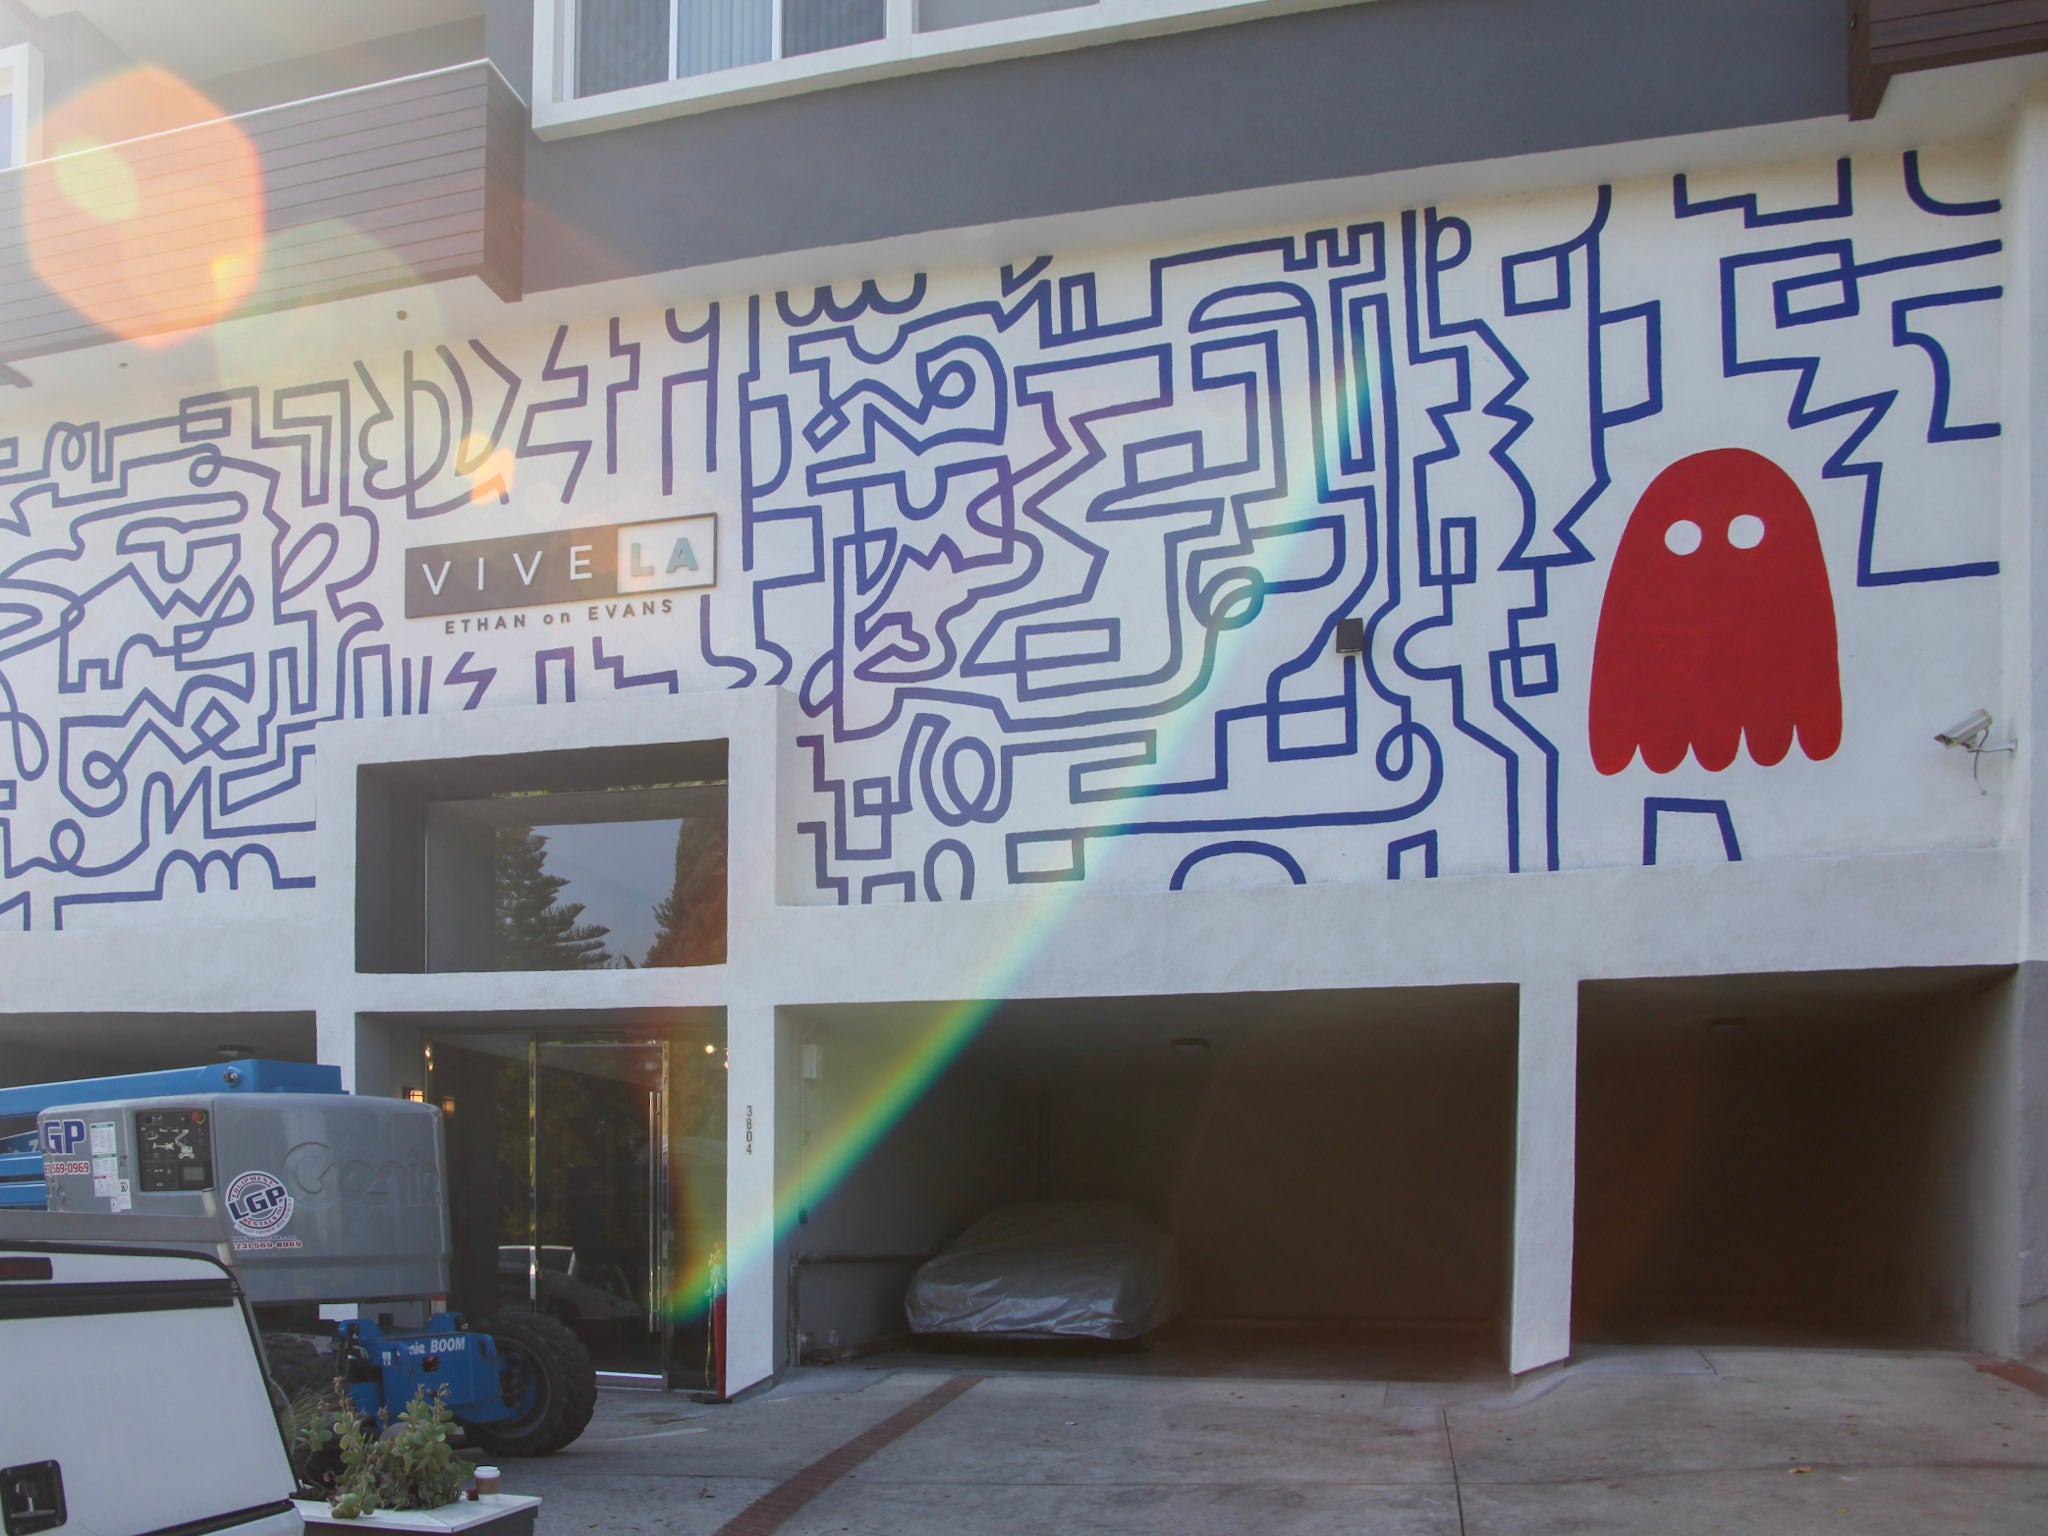 "Exterior wall of Ethan on Evans in Los Feliz with a large hand-painted mural inspired by Pac-Man, featuring a maze and iconic ghost figure, creating a playful welcome for apartment residents.